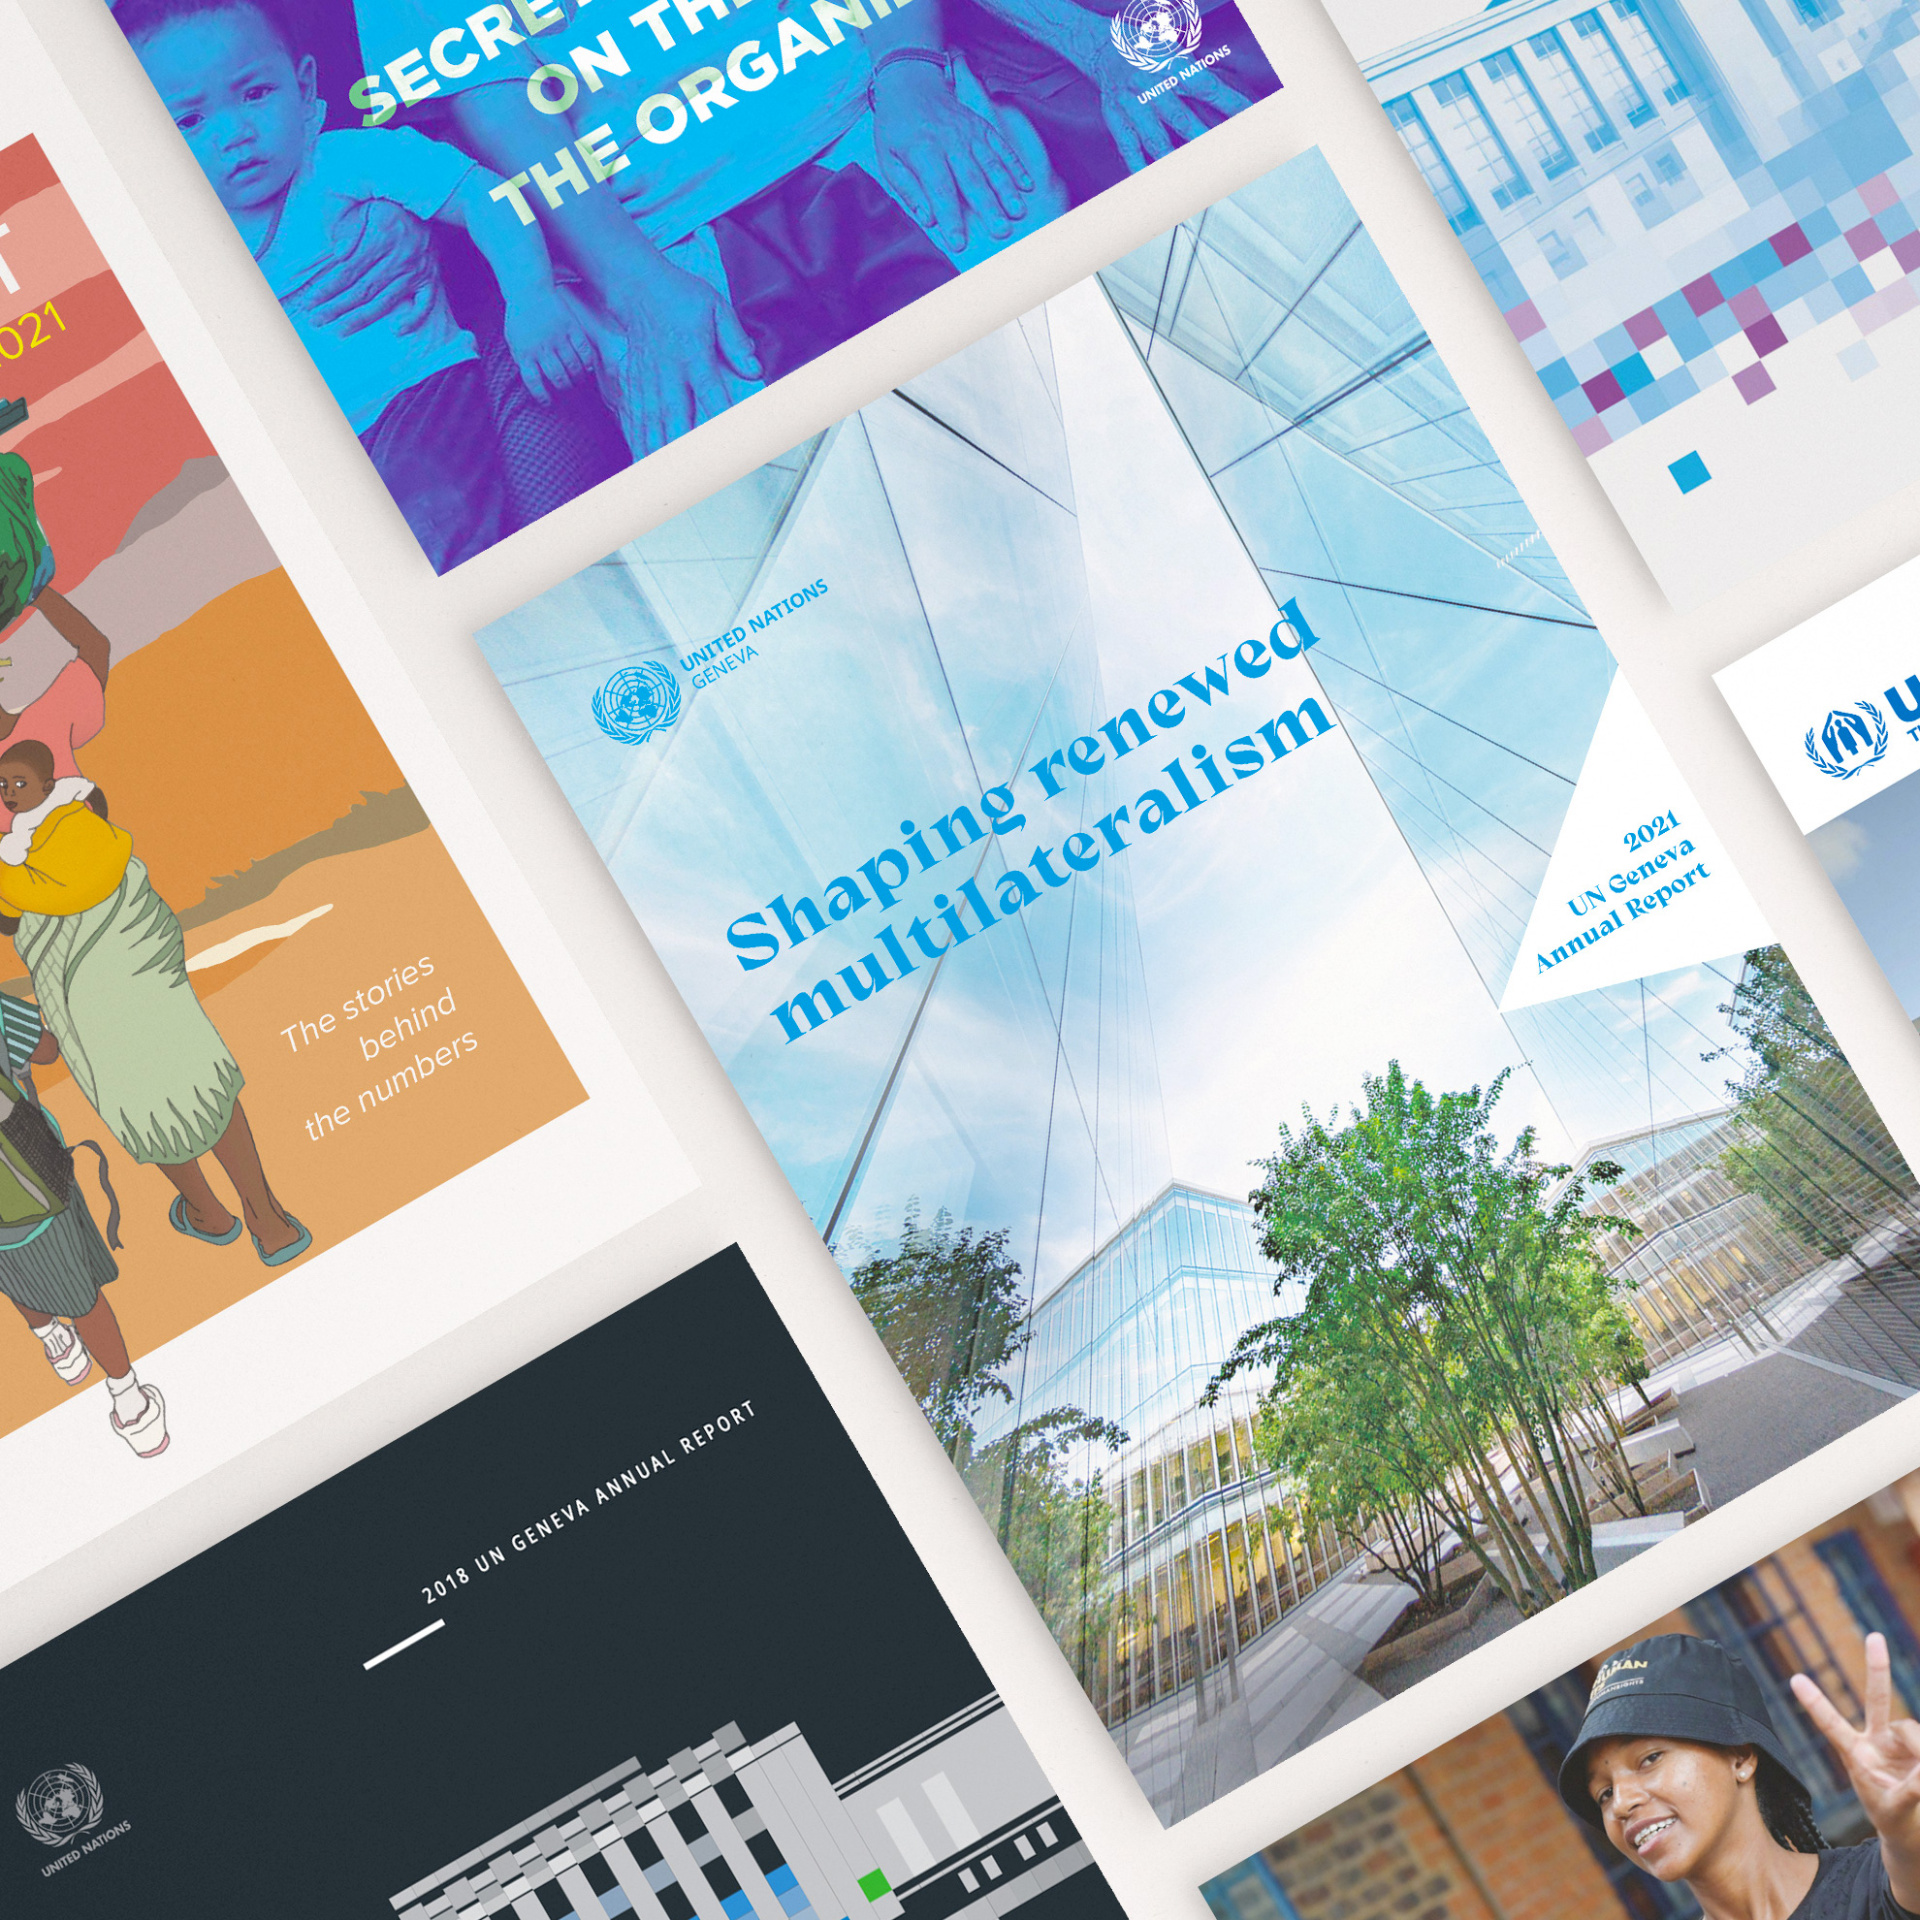 A selection of UNOG publications, neatly aligned